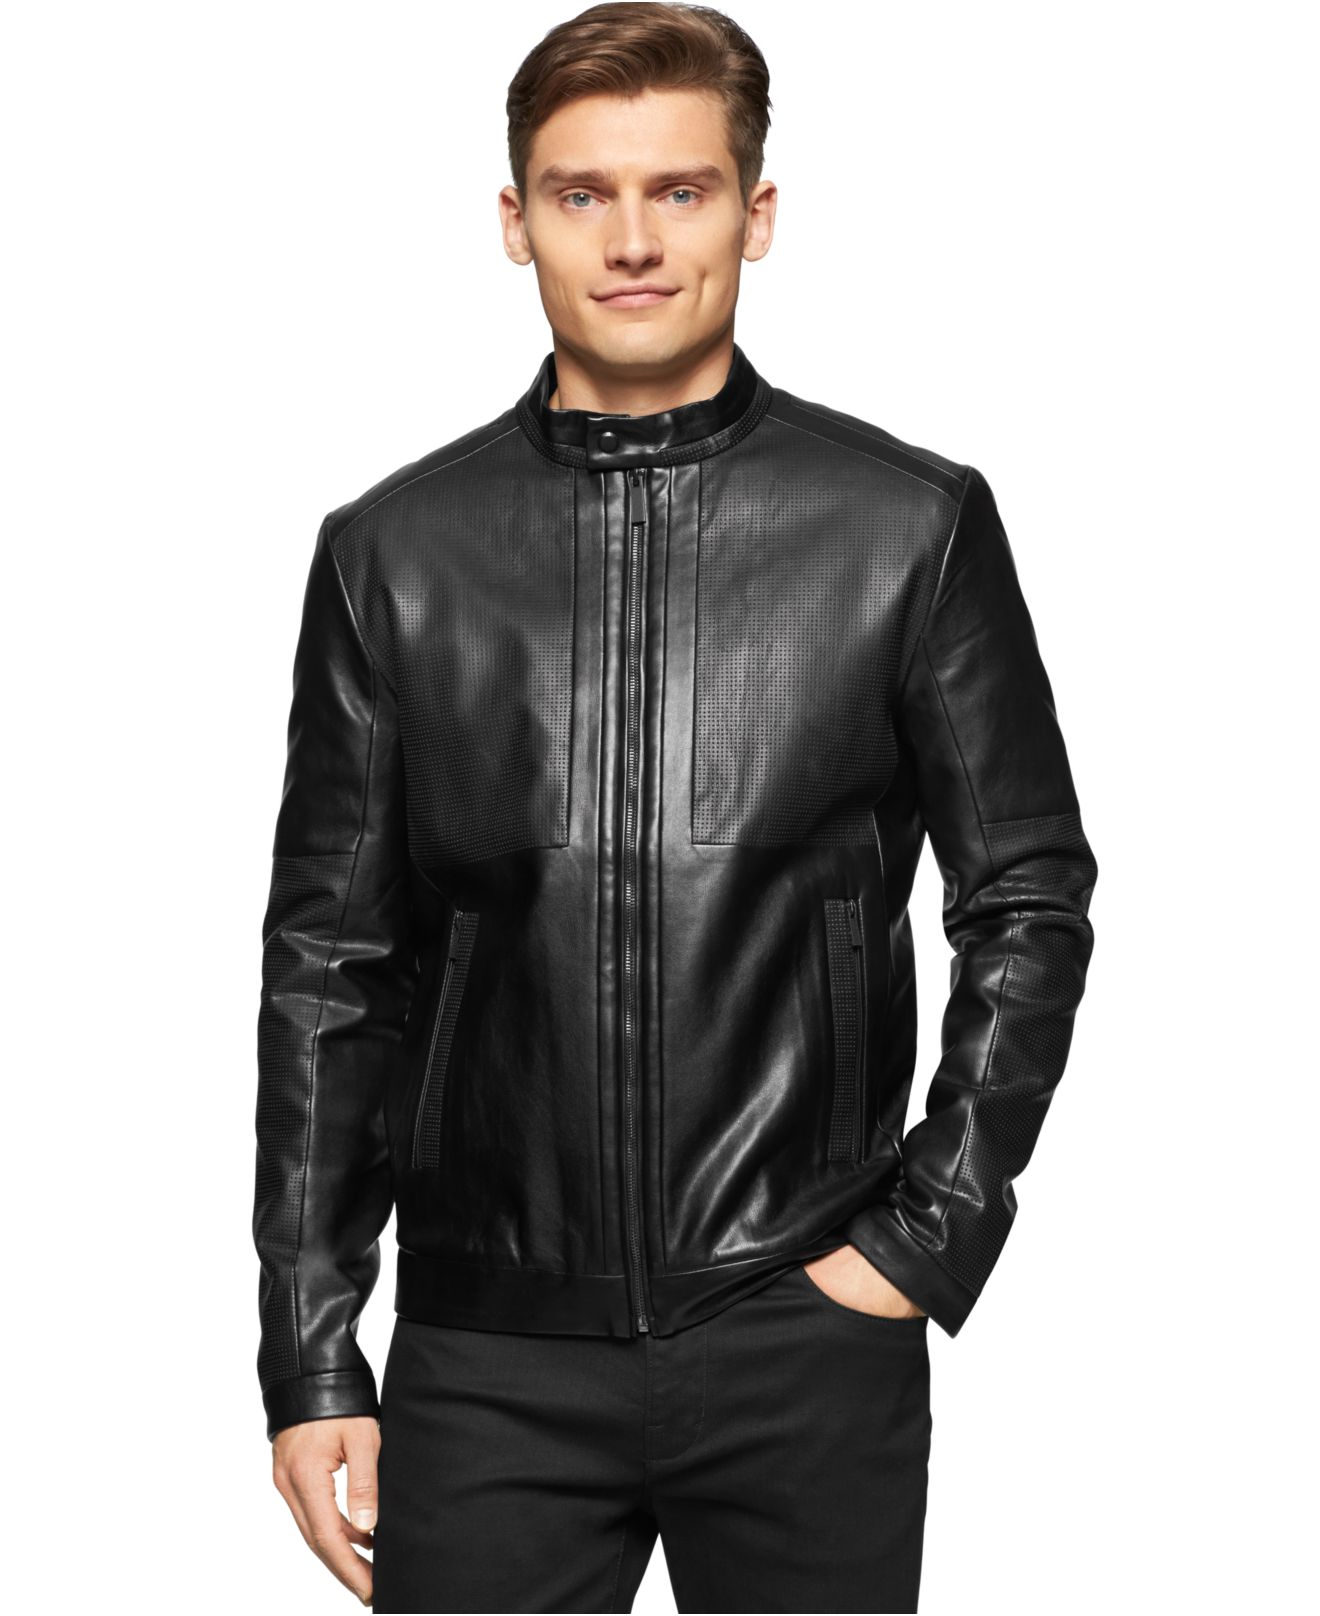 Calvin Klein Perforated Fauxleather Jacket in Black for